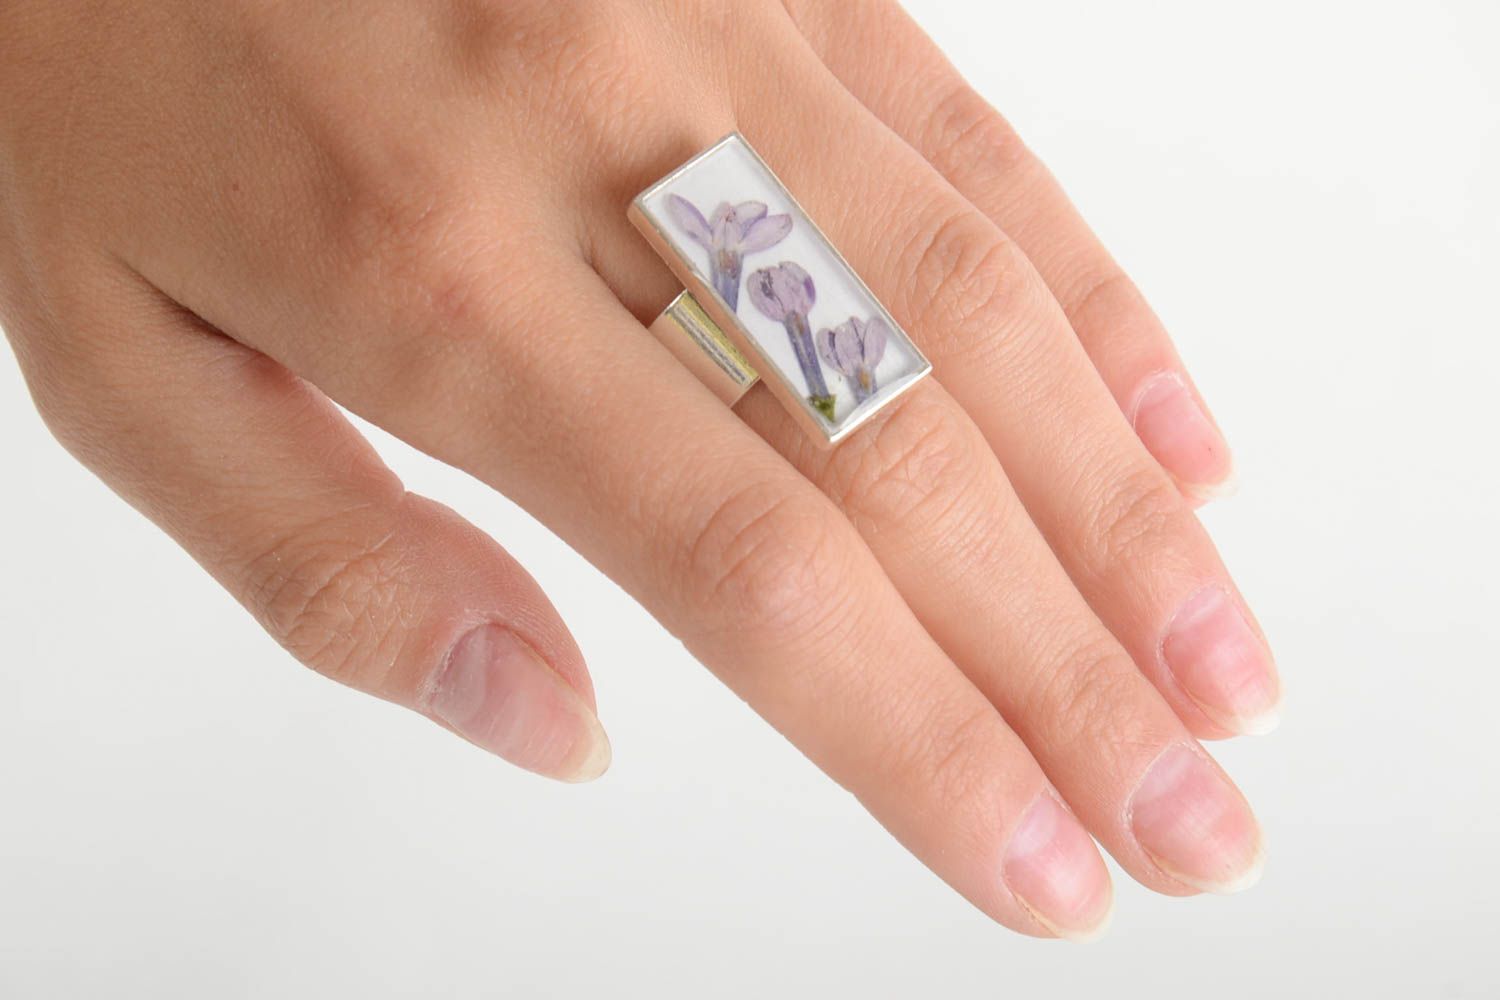 Women's homemade designer ring with dried flowers and epoxy coating photo 2